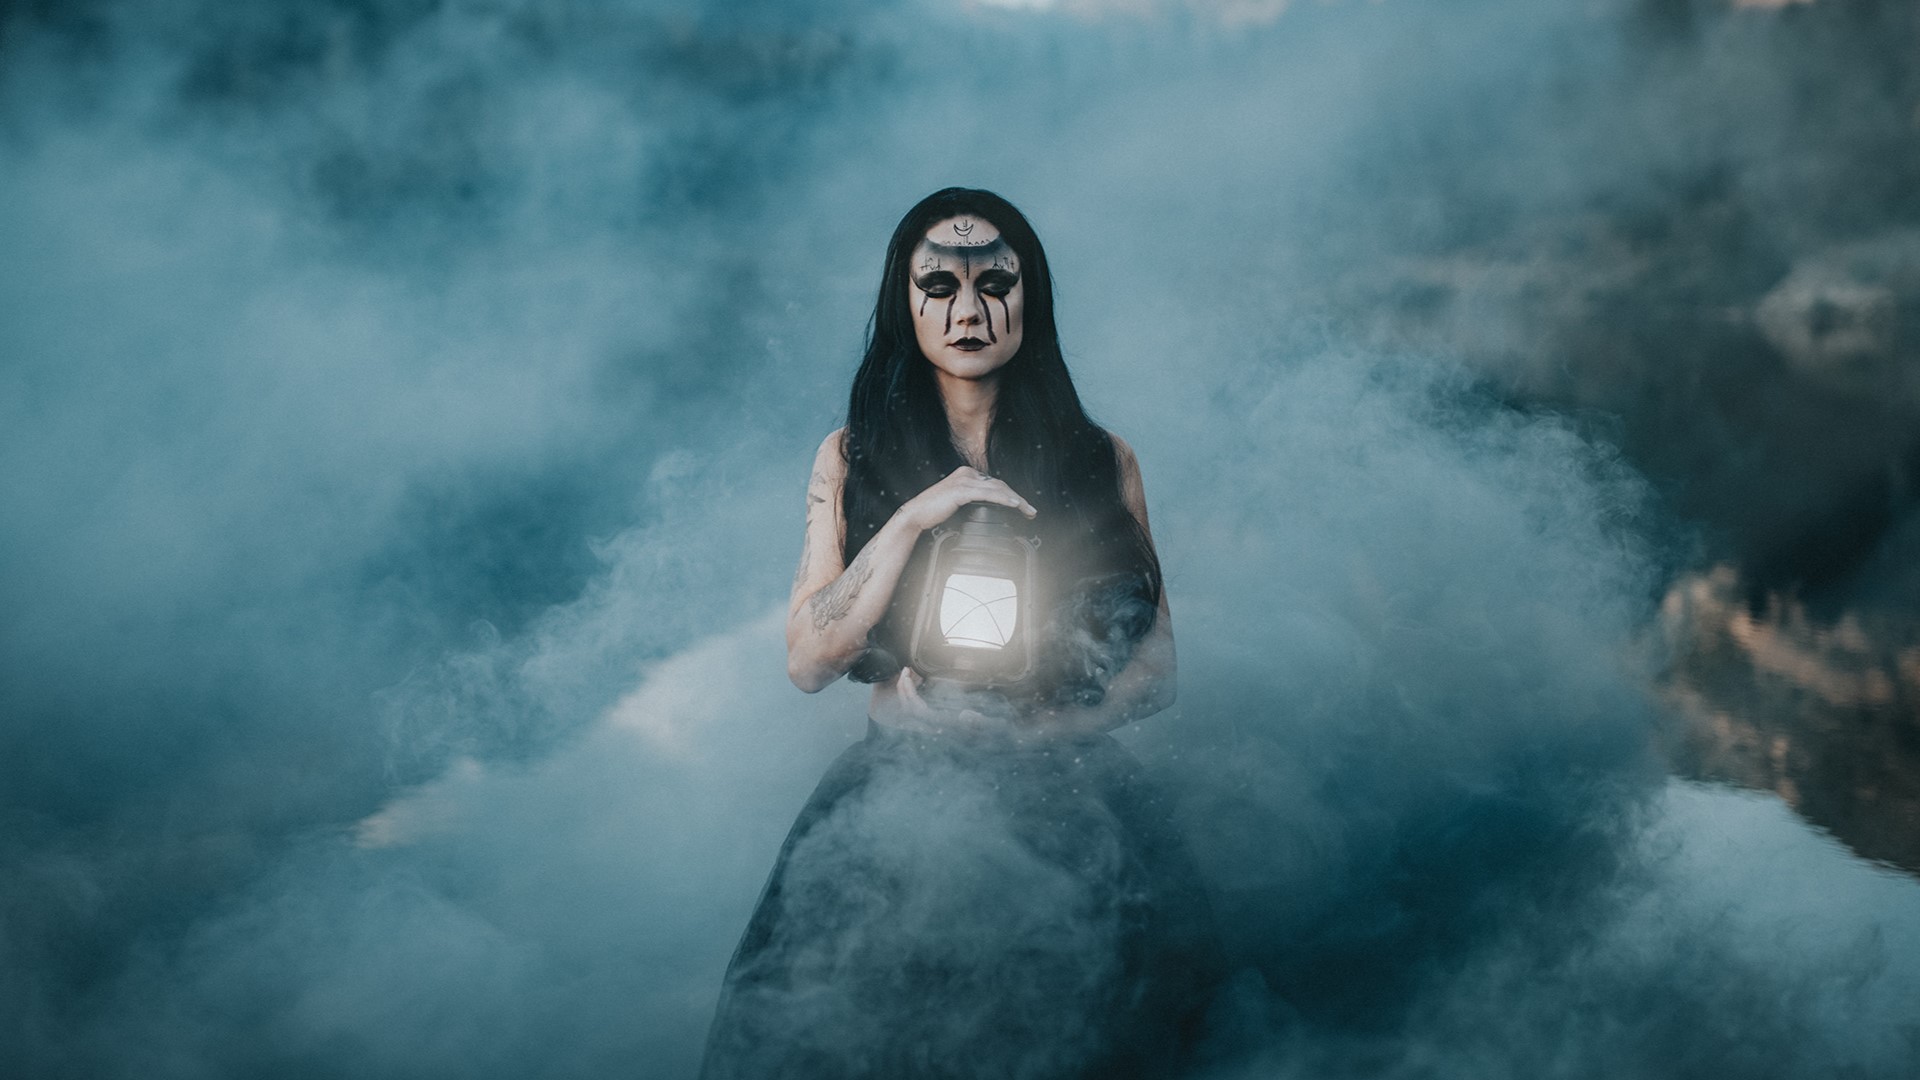 Dawndra Budd uses her photography skills and Photoshop to create ethereal, mystical images that empower her models. #k5evening